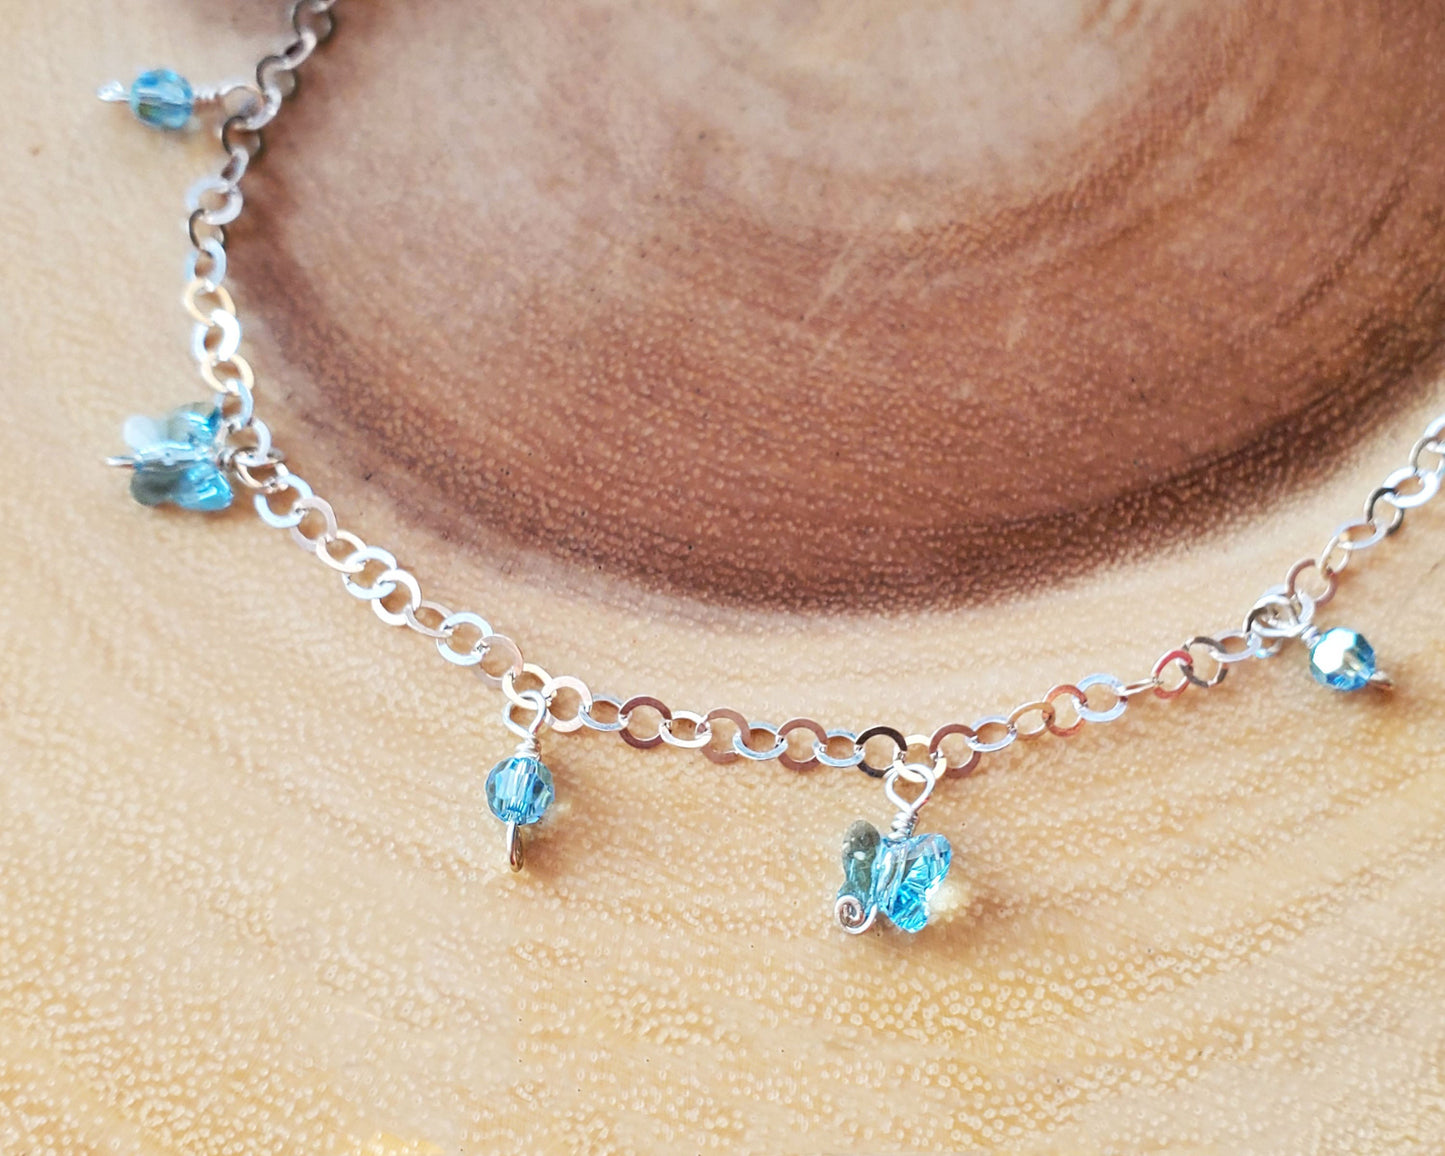 Blue Crystal Butterfly Anklet-Ankle Bracelet with little Crystal Butterflies and beads dangling on  Sterling Silver Chain.